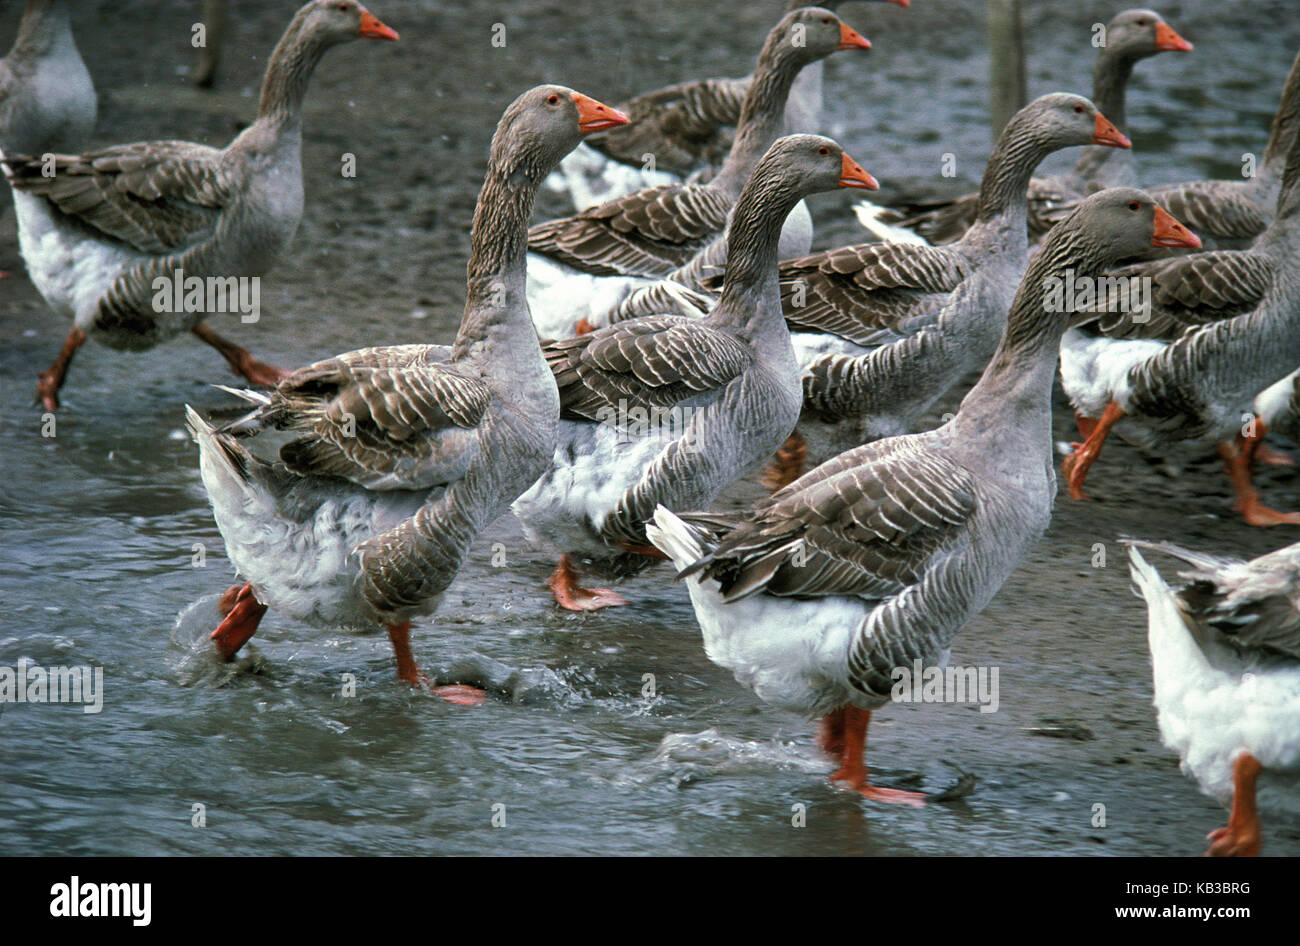 Of Toulouser geese, fowl race to the production by goose liver pie in France is bred, Stock Photo